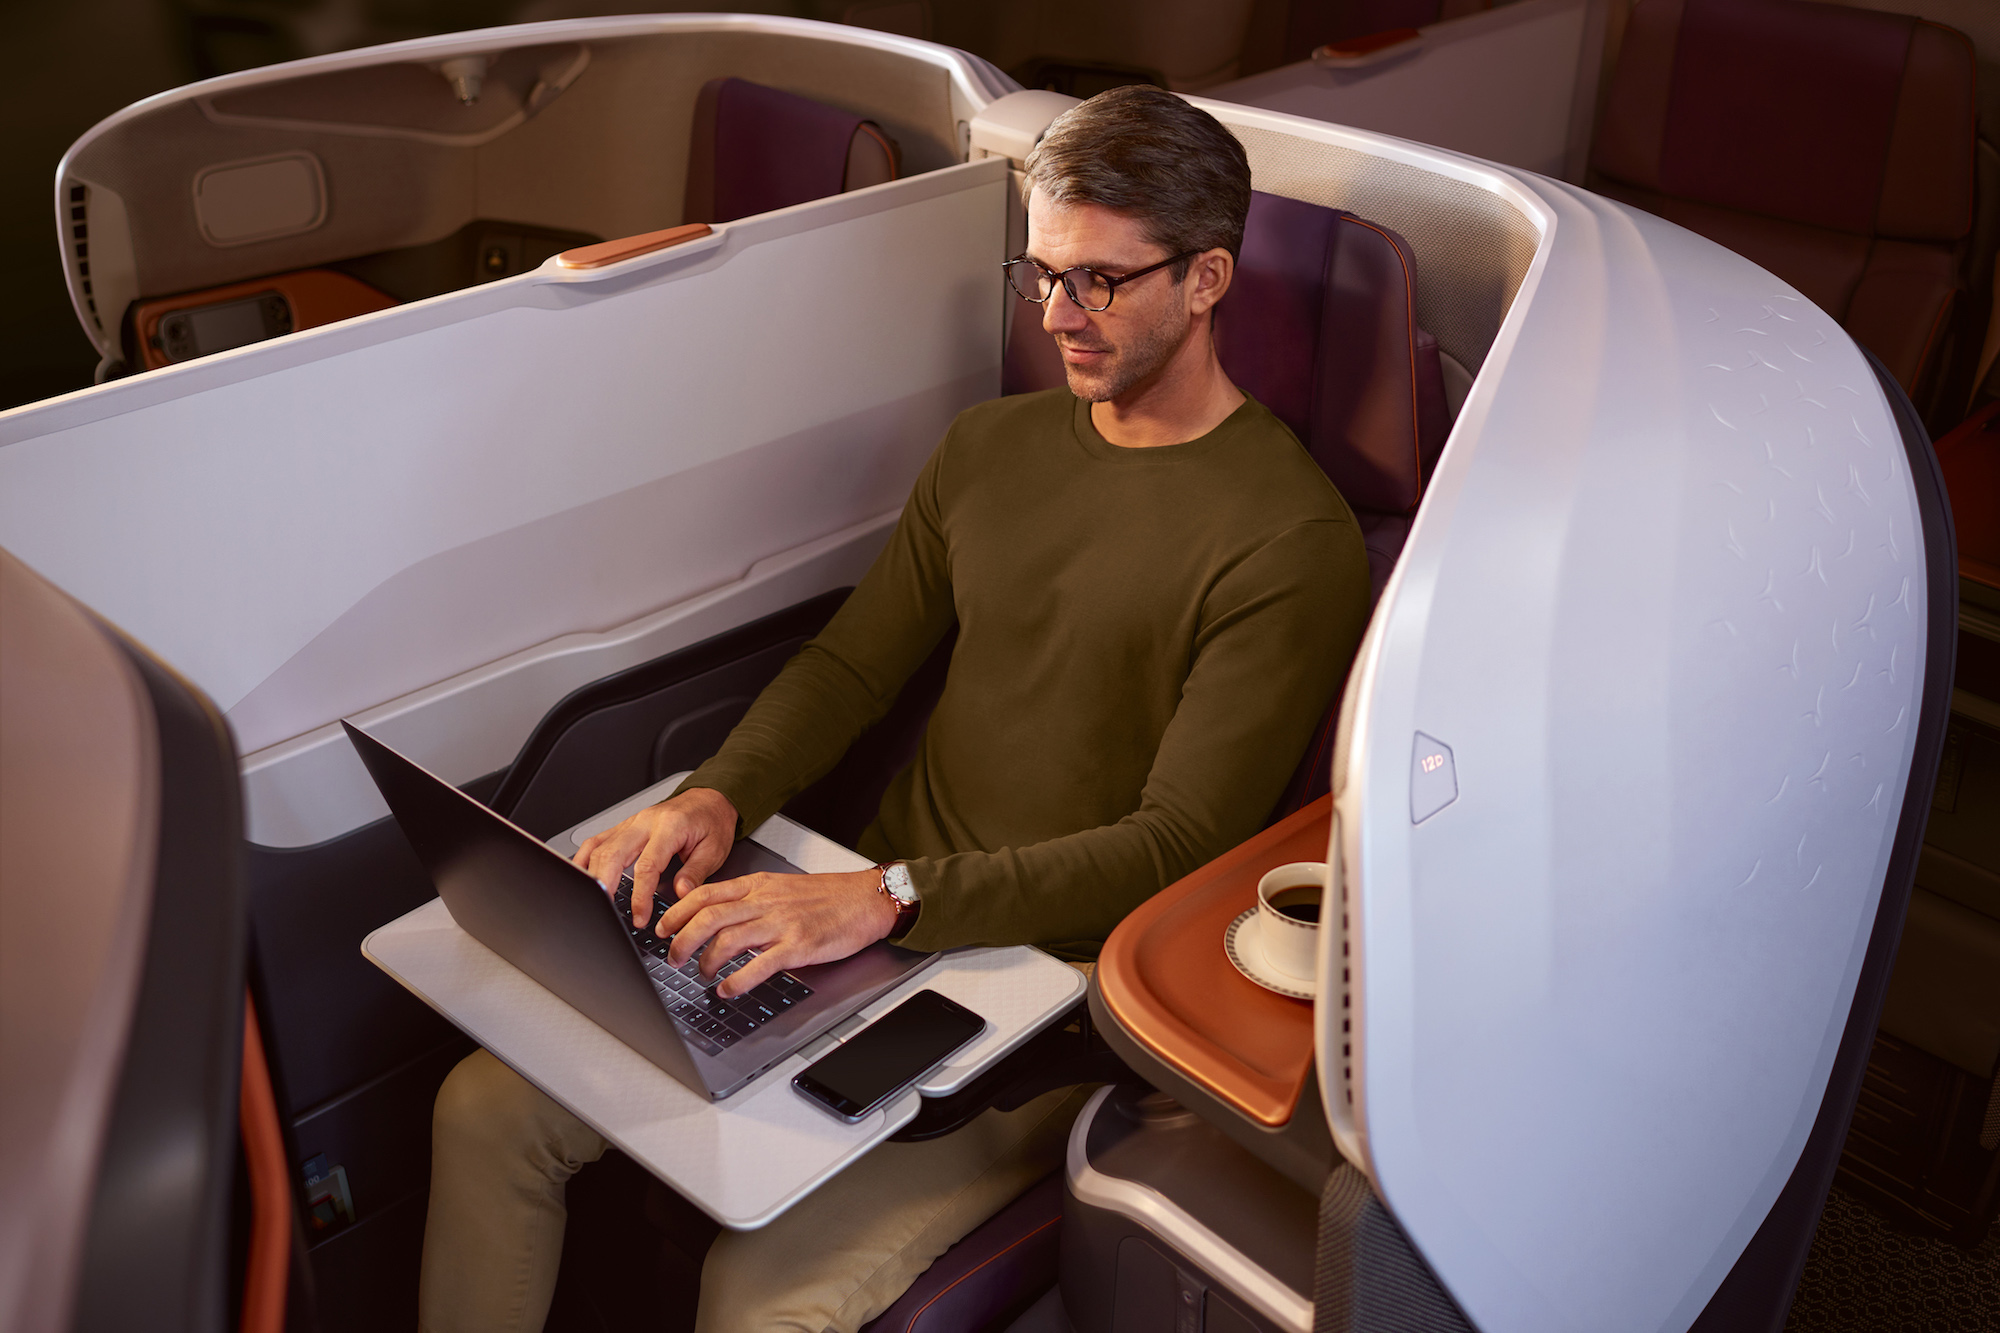 Man on Laptop (Singapore Airlines)